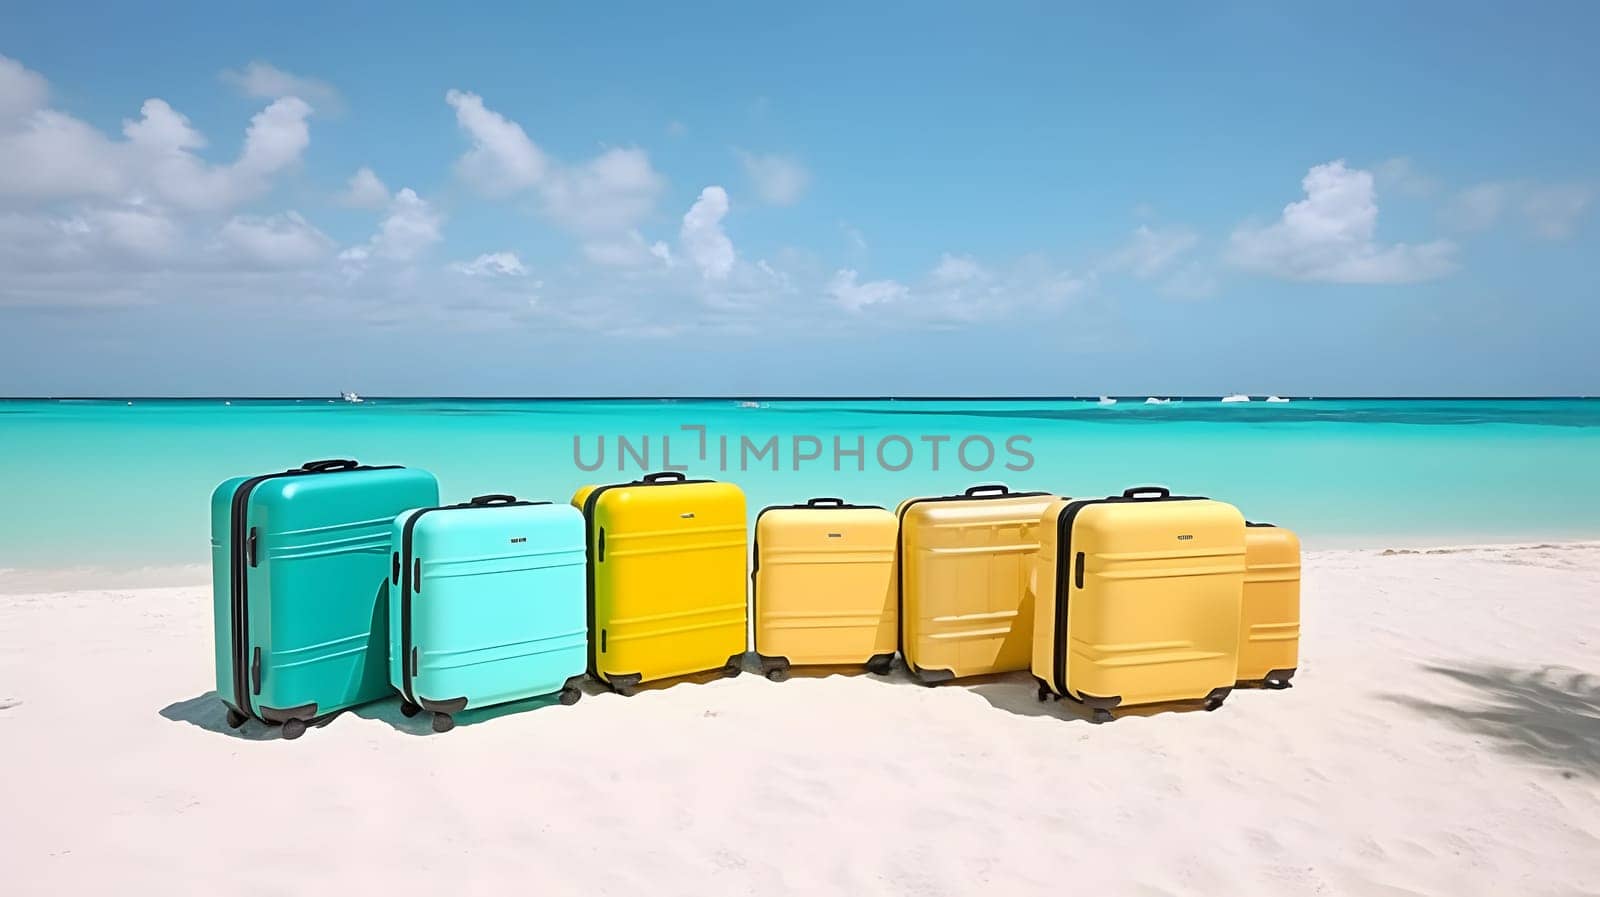 few modern suitcases on tropical resort beach at sunny day, neural network generated art by z1b